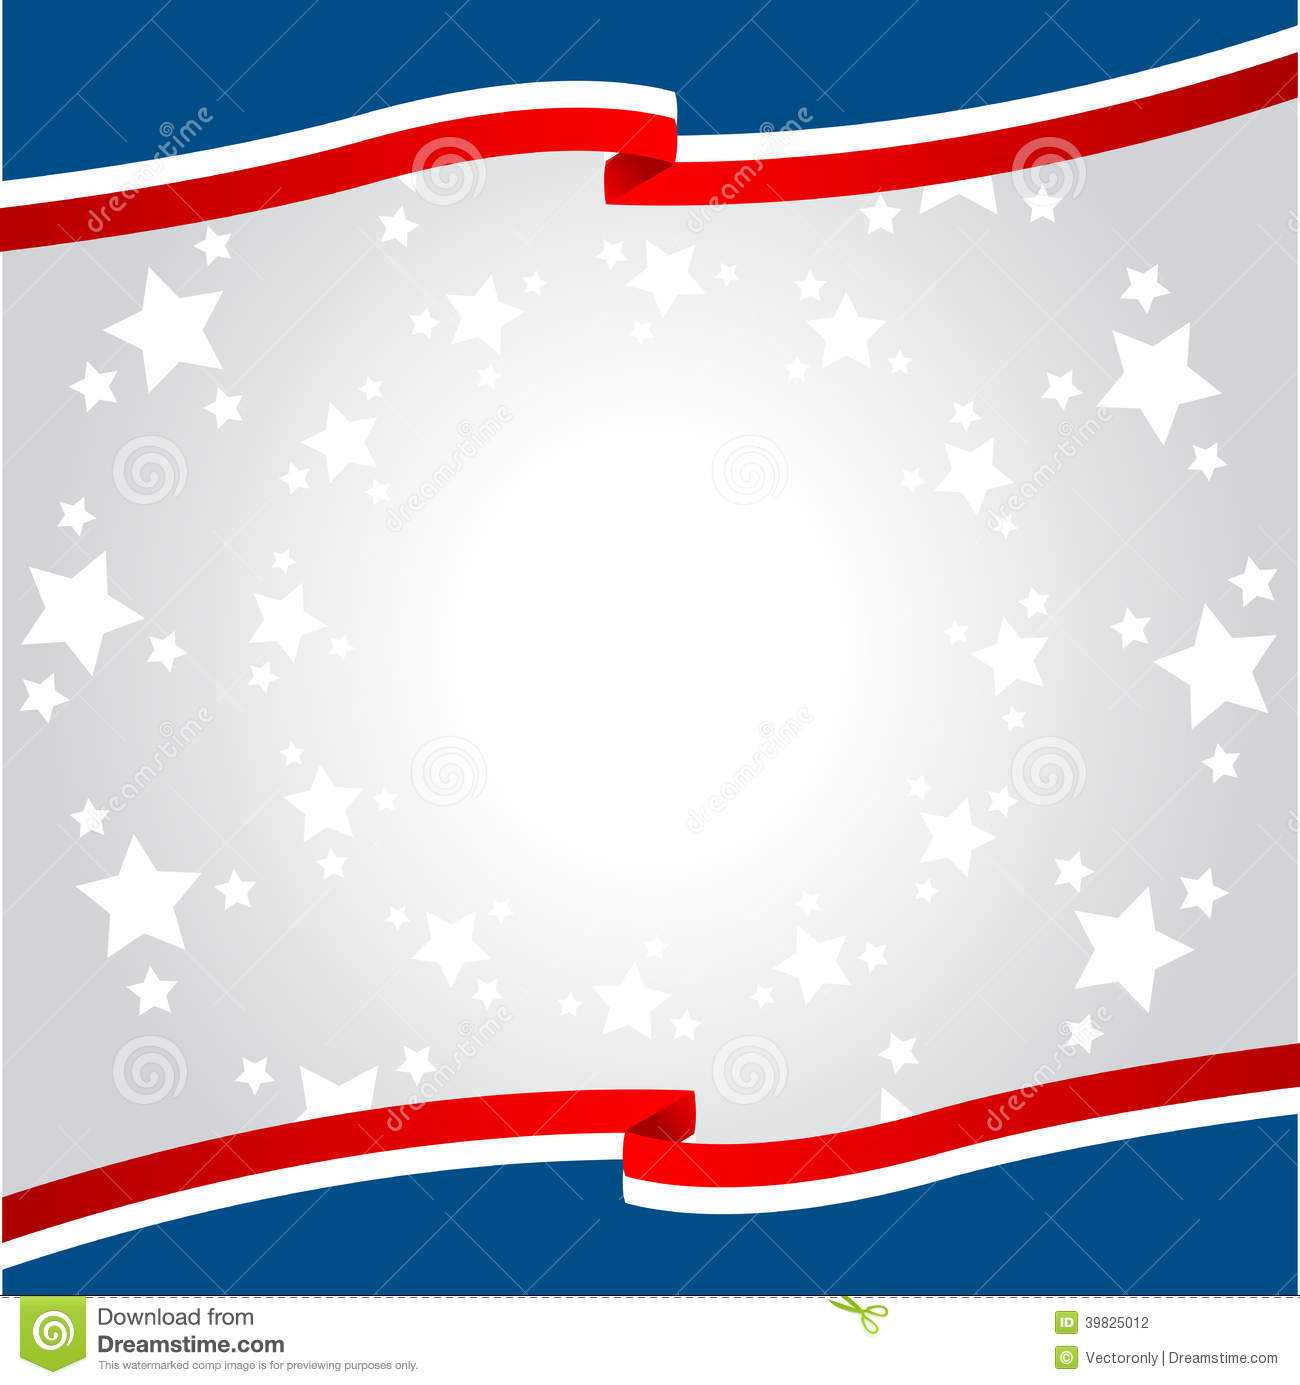 Patriotic Stock Vector Image 39825012 Quality Backgrounds In Patriotic Powerpoint Template